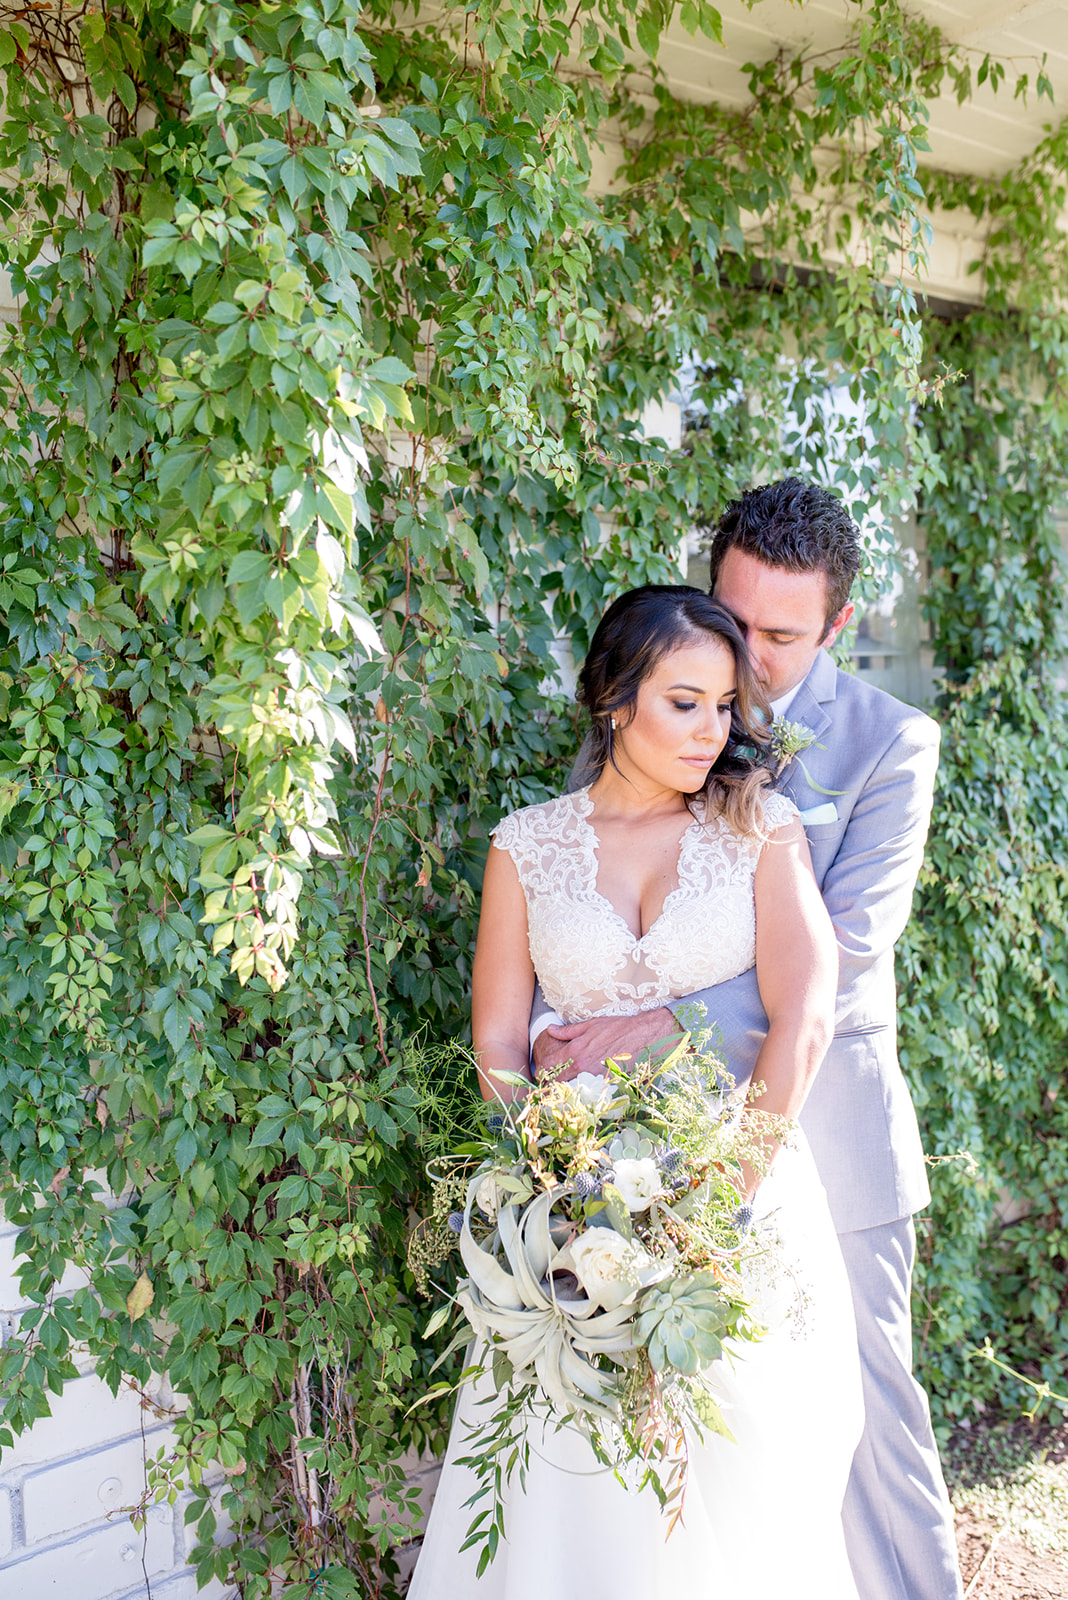 Newlyweds share an intimate moment on a wall of vines